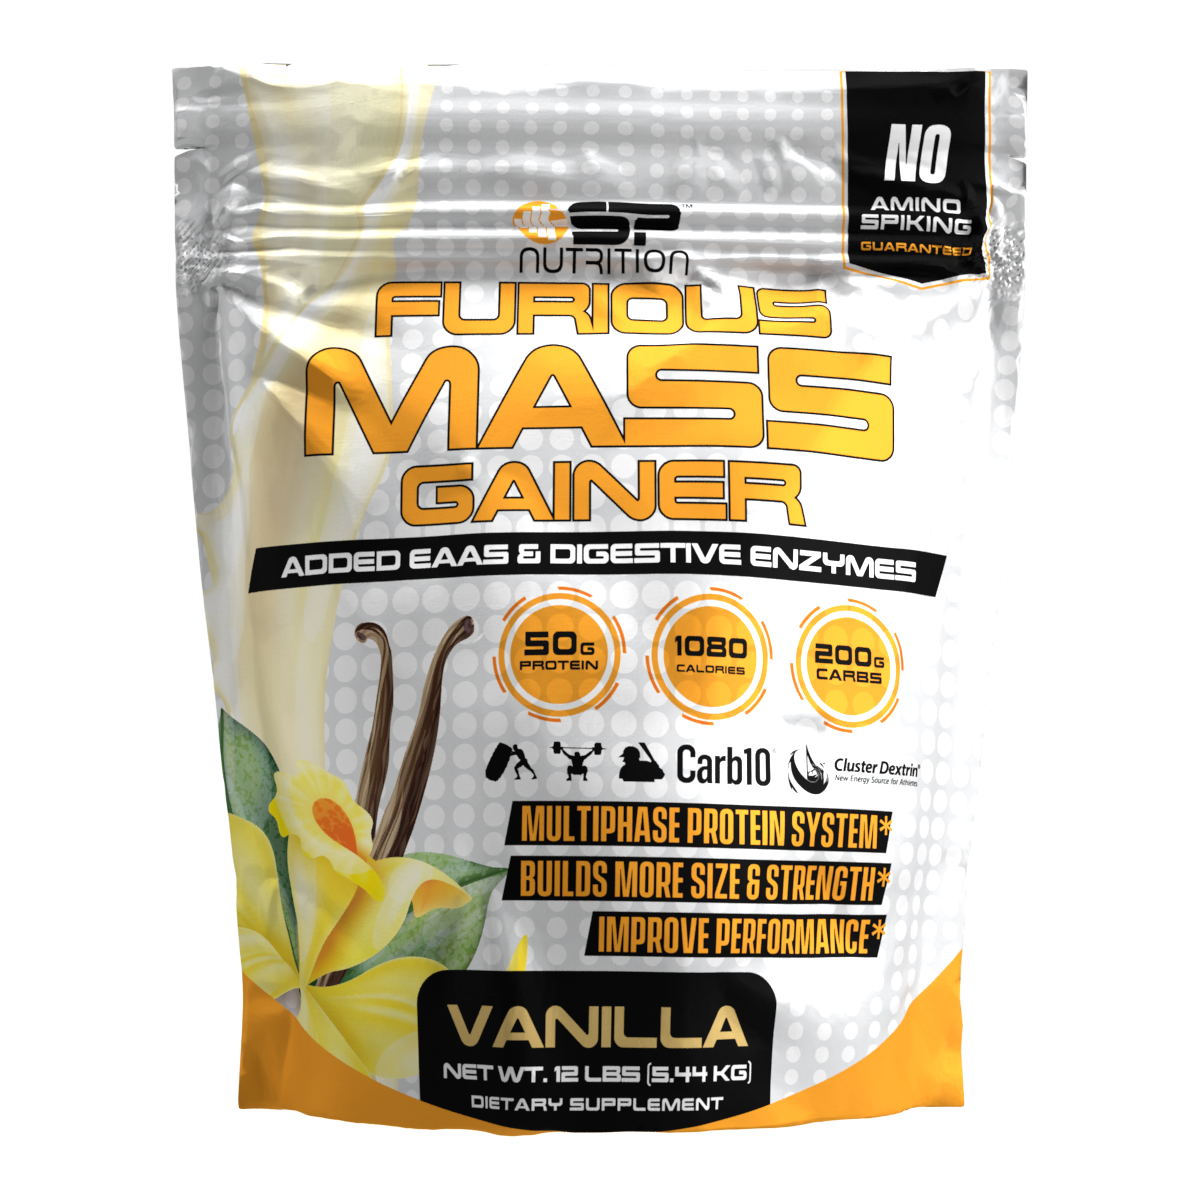 FURIOUS MASS GAINER 12 LBS, Mass Gainer Protein Powder, Gain Strength & Size Quickly, Mixes Easily, Tastes Delicious.